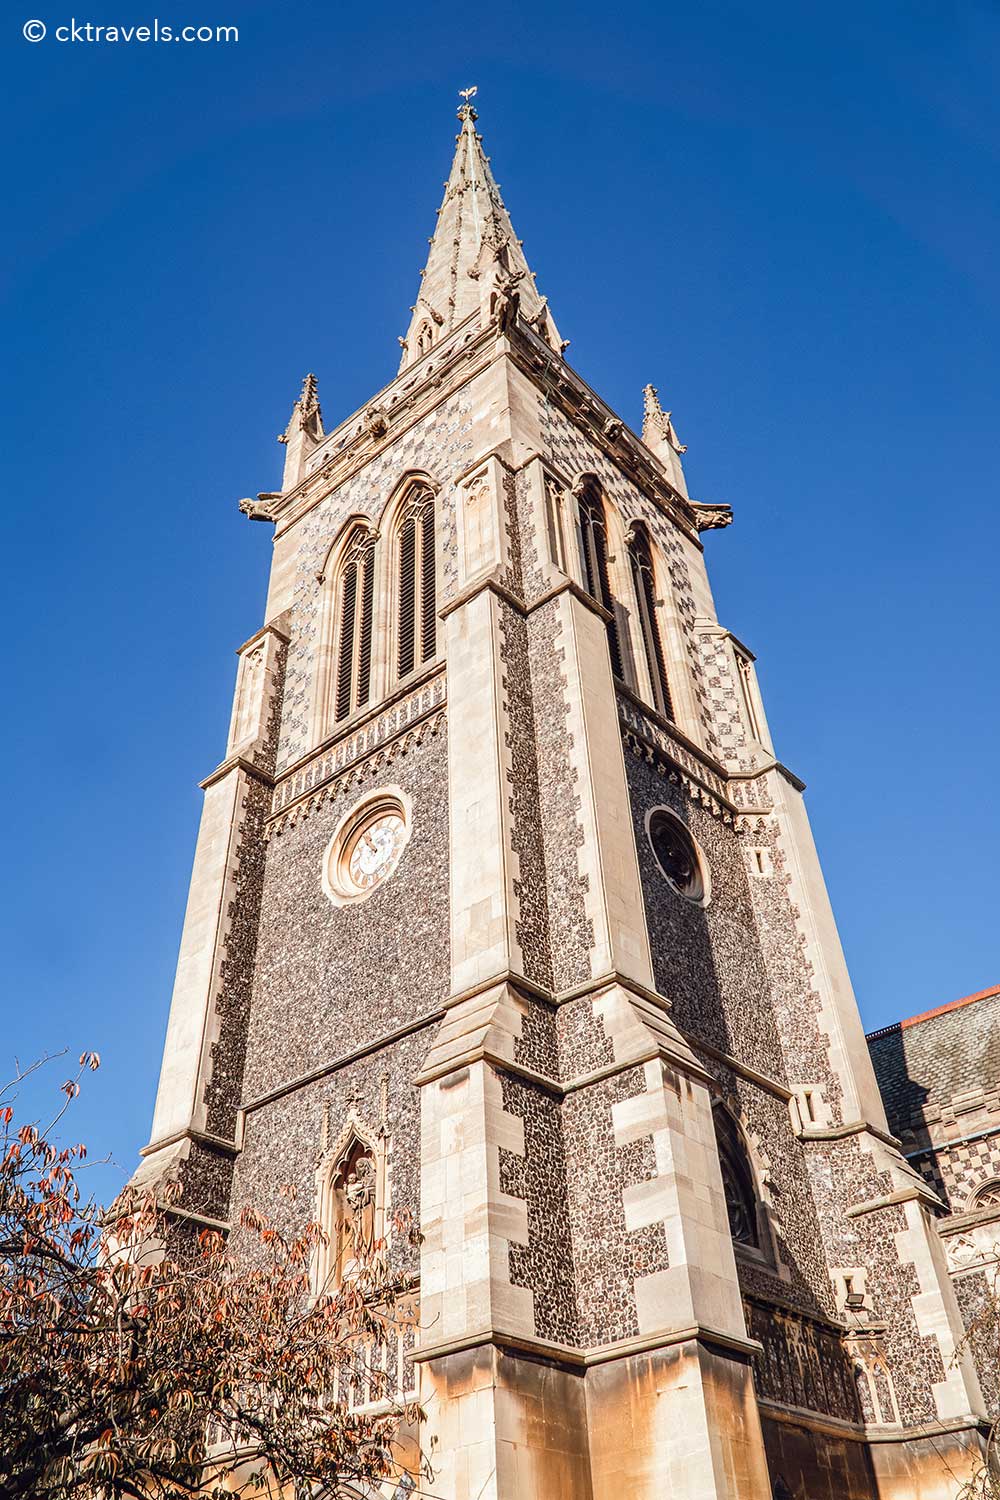 St Mary-le-Tower Ipswich. Copyright CK Travels